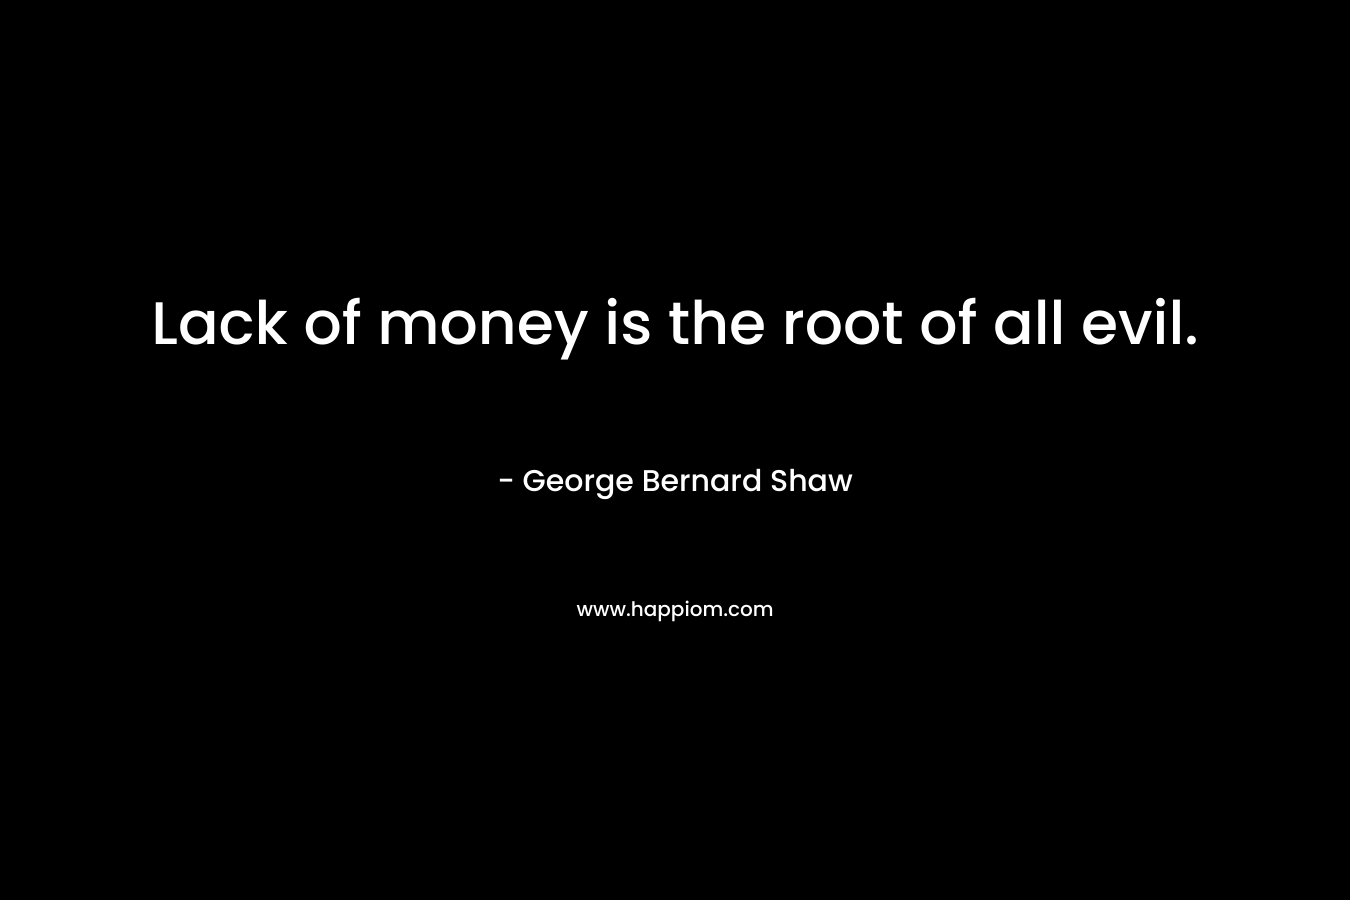 Lack of money is the root of all evil.